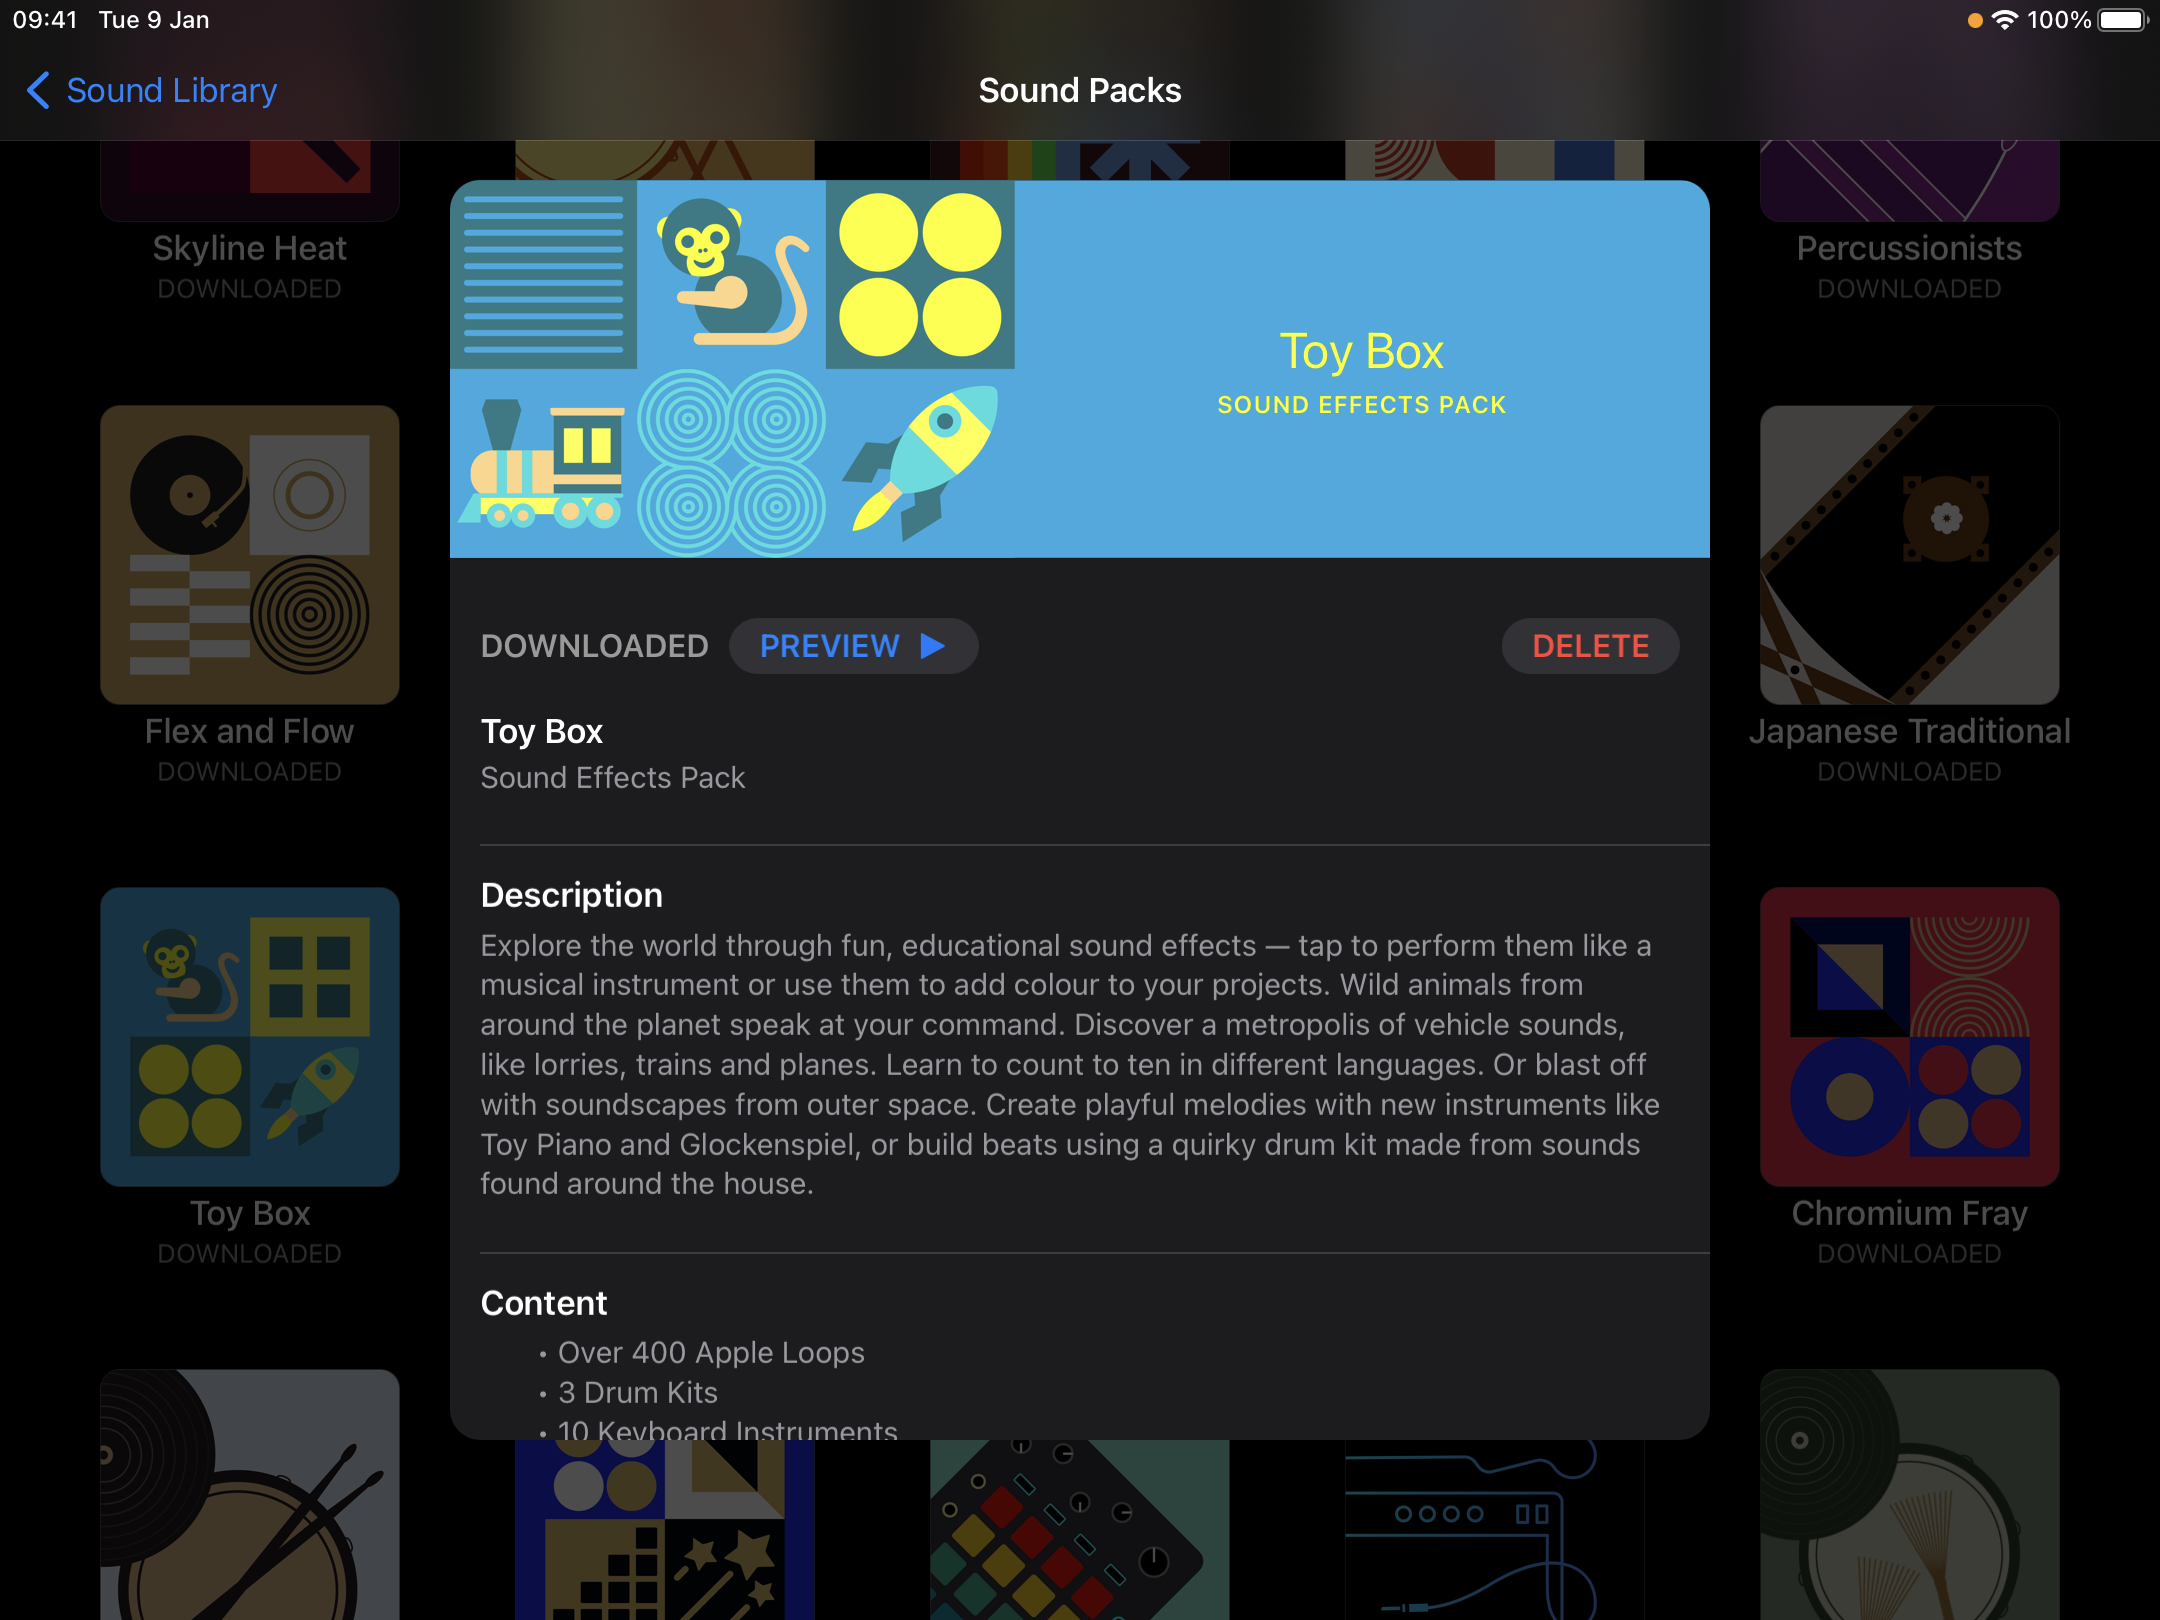 Screenshot from GarageBand for iPad. The Toy Box Sound Pack Preview is open, with a description of the sound pack’s contents.